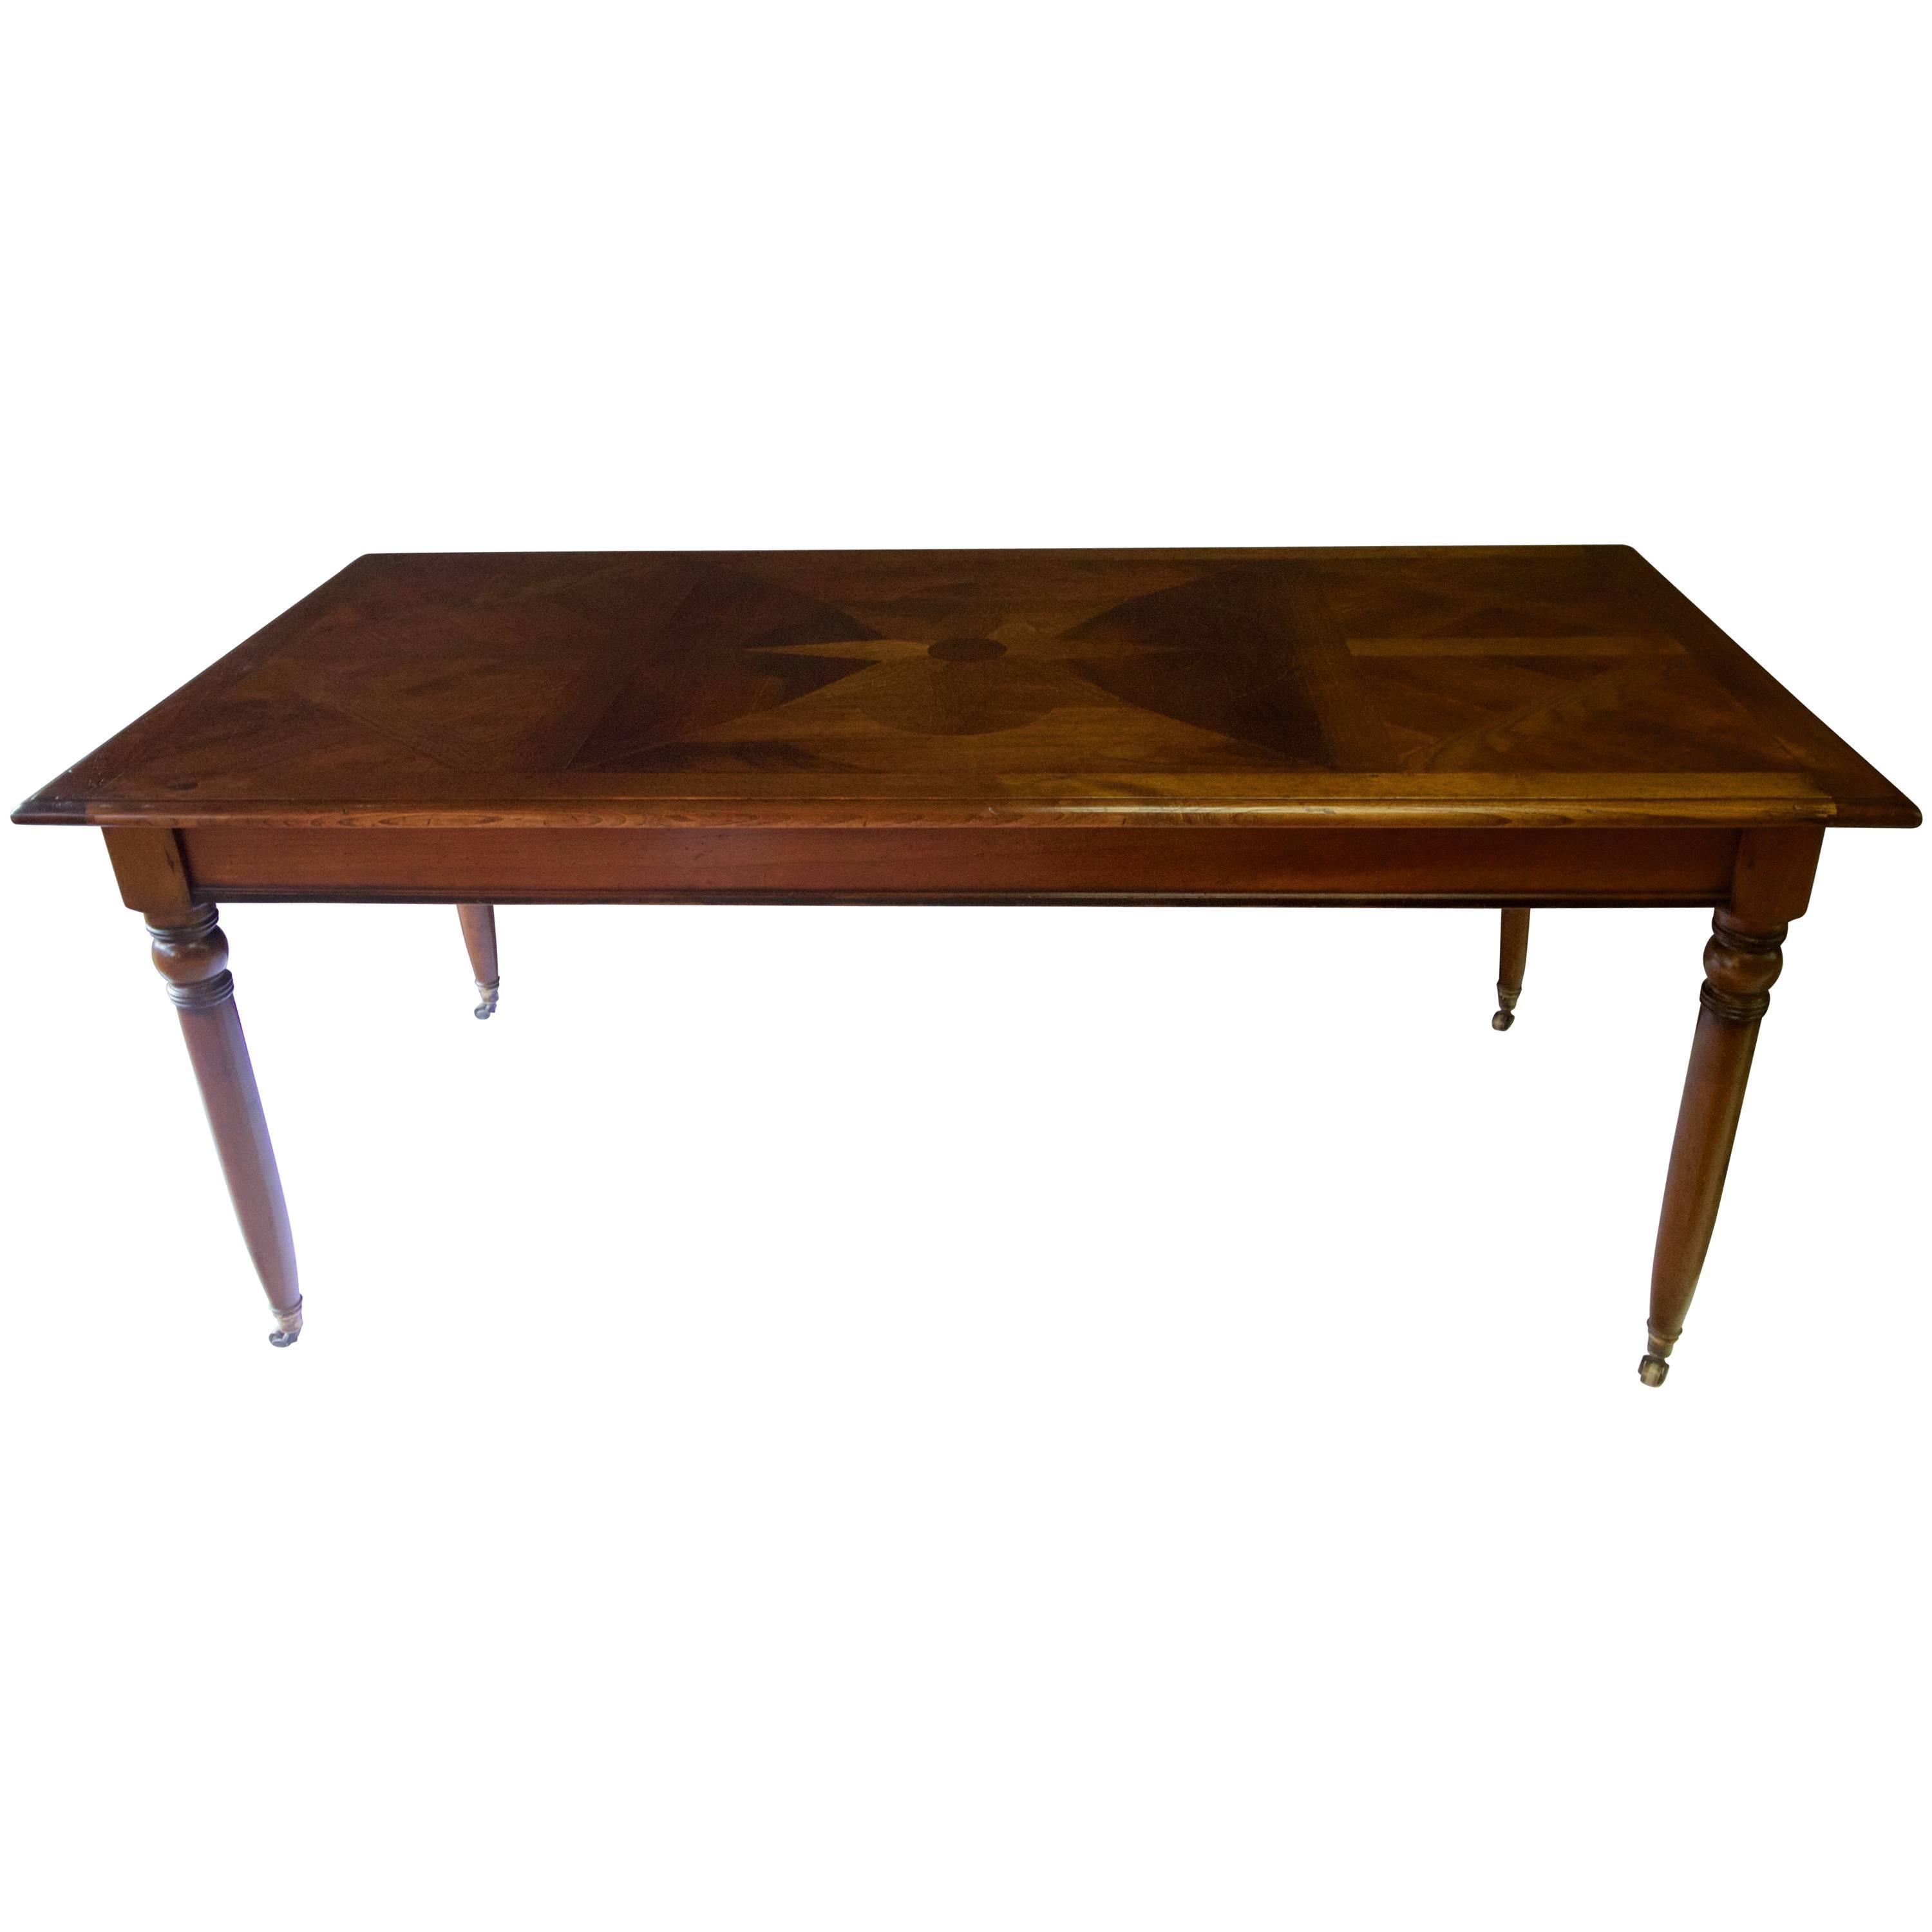 Early 20th Century Large French Wild Cherry Parquetry Top Dining Table For Sale